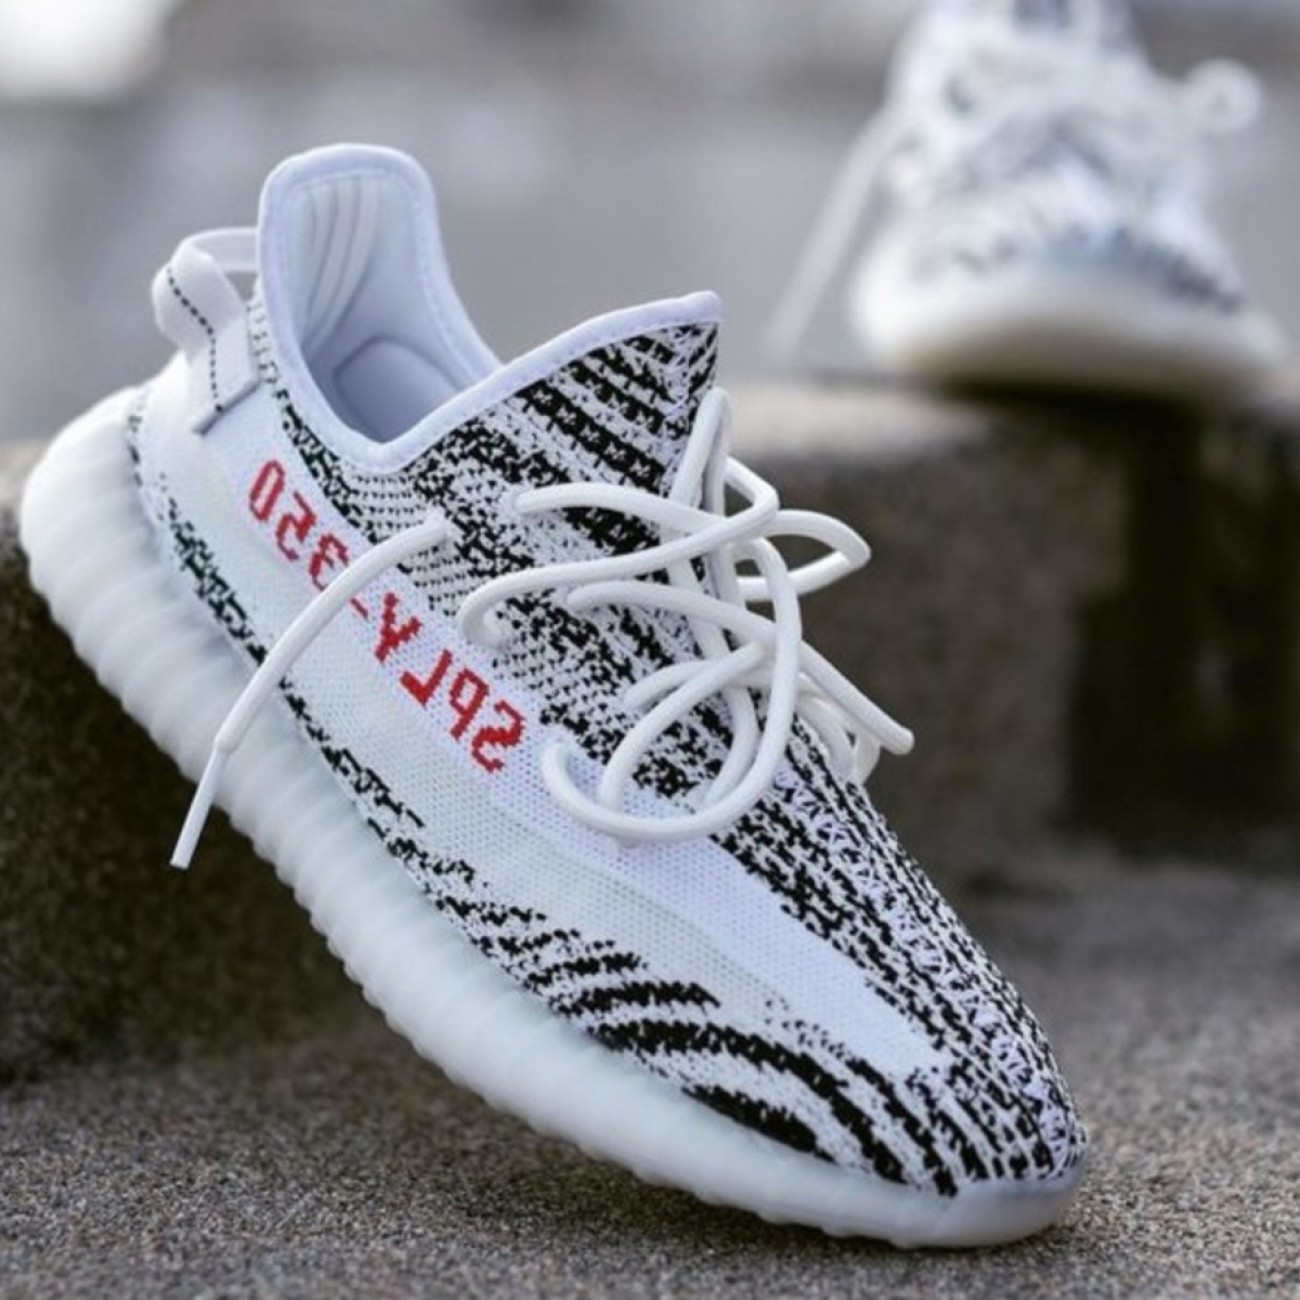 Adidas Yeezy Boost 350 V2 Zebra Cp9654 Outfit 2018 Release Date (6) - newkick.org